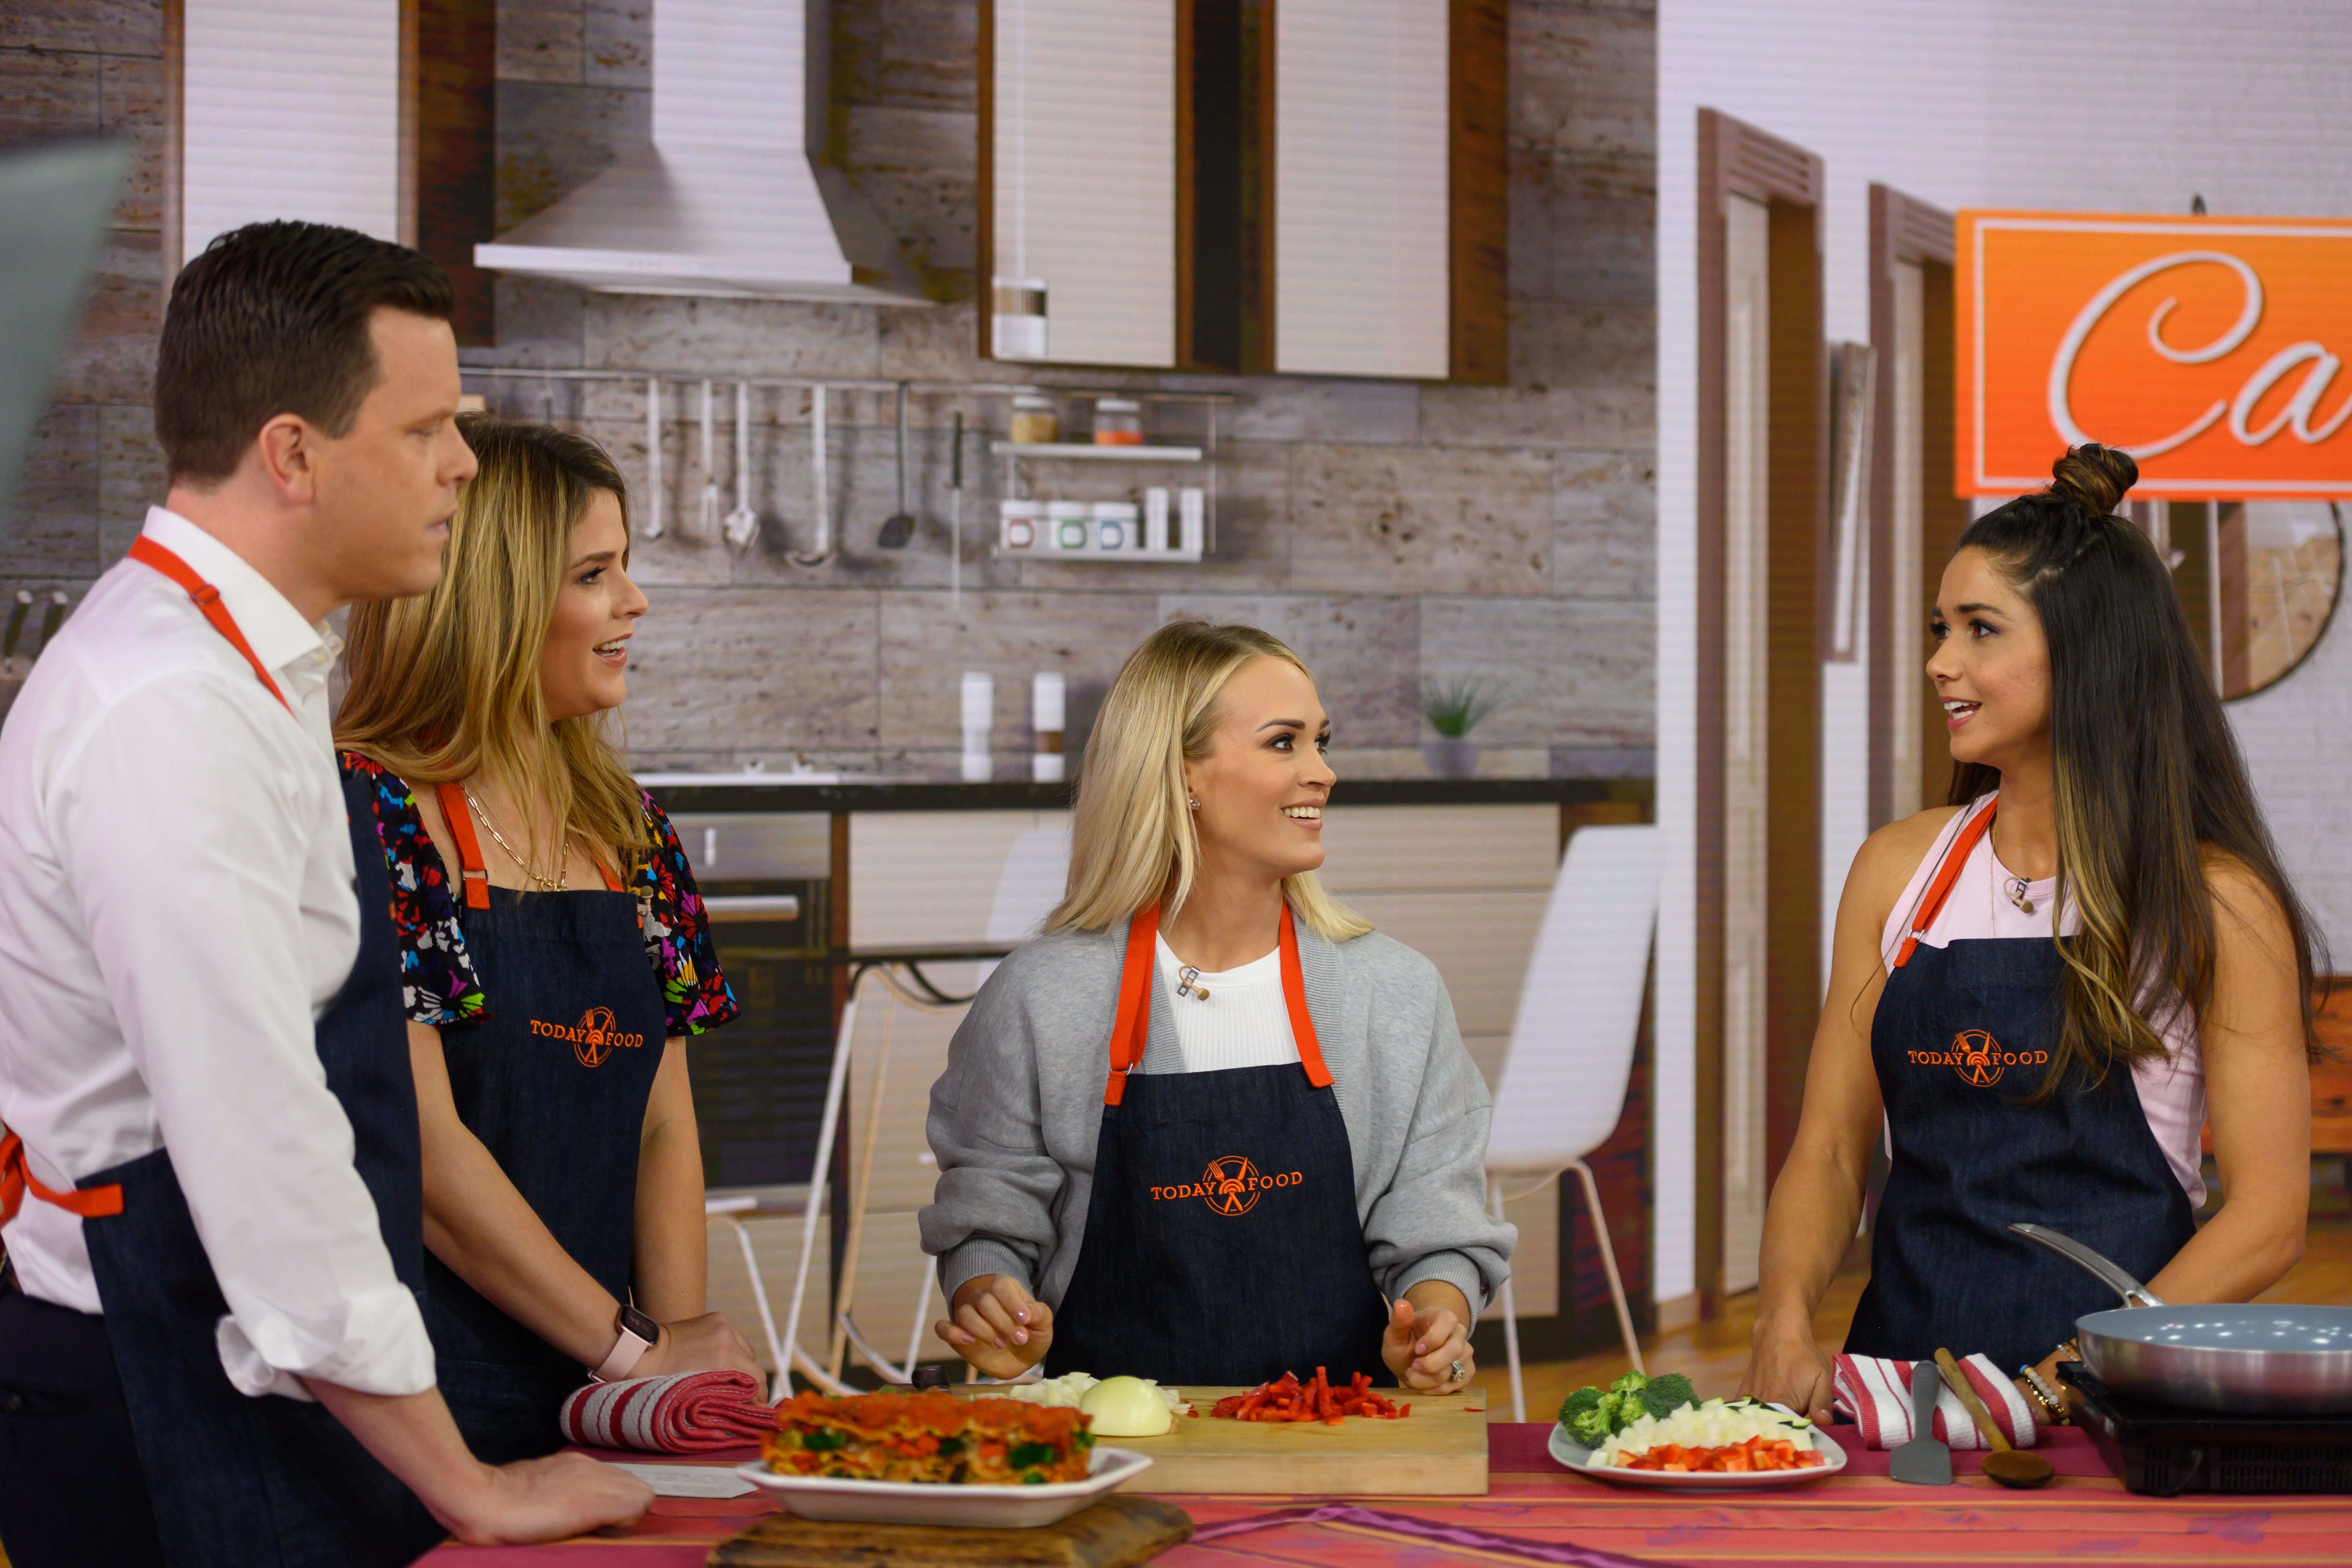 Willie Geist, Jenna Bush Hager, Carrie Underwood, and Cara Clark, Tuesday, March 3, 2020, on the "Today" show | Source: Getty Images